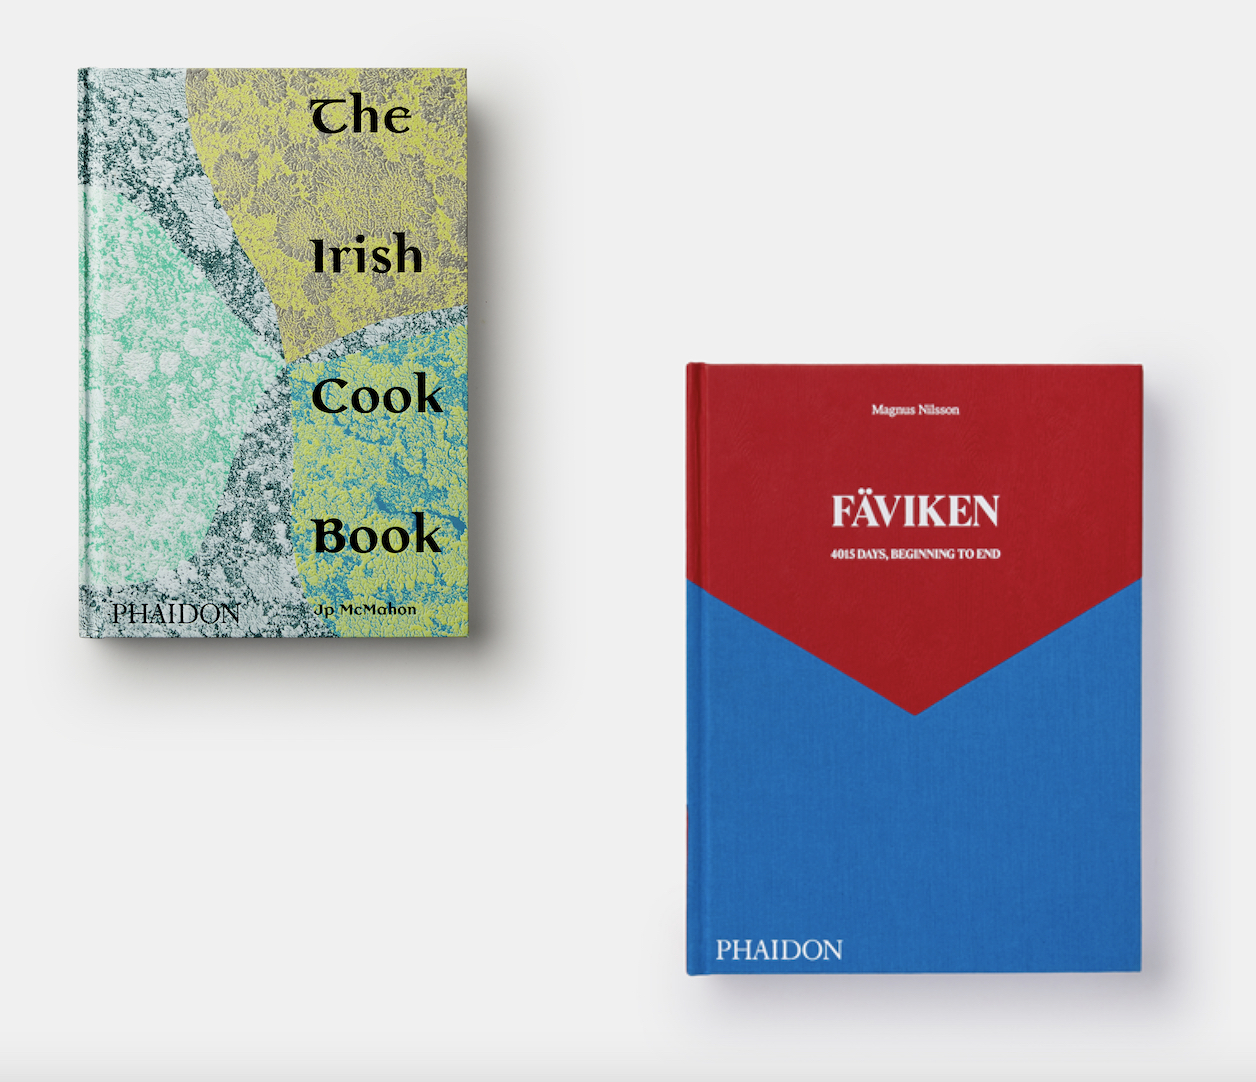 The Irish Cookbook by Jp McMahon and Fäviken: 4015 Days, Beginning to End by Magnus Nilsson 